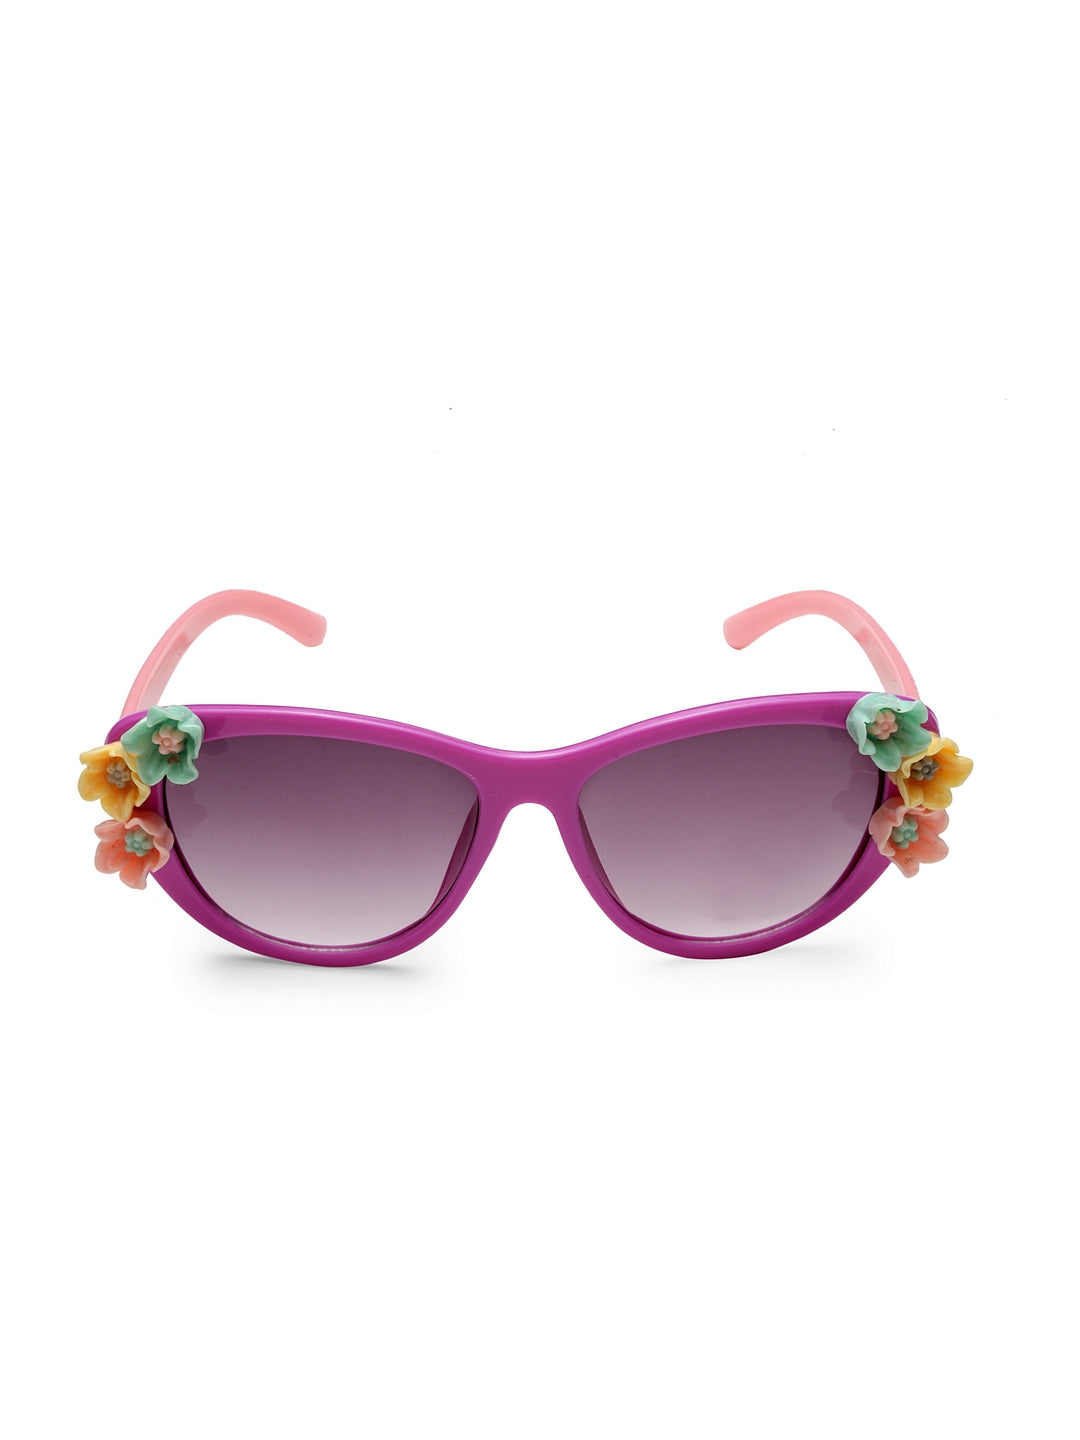 Stol'n Kids Yellow and Blue Bow Applique Rectangular Sunglasses:Yellow and Blue Blue and Pink